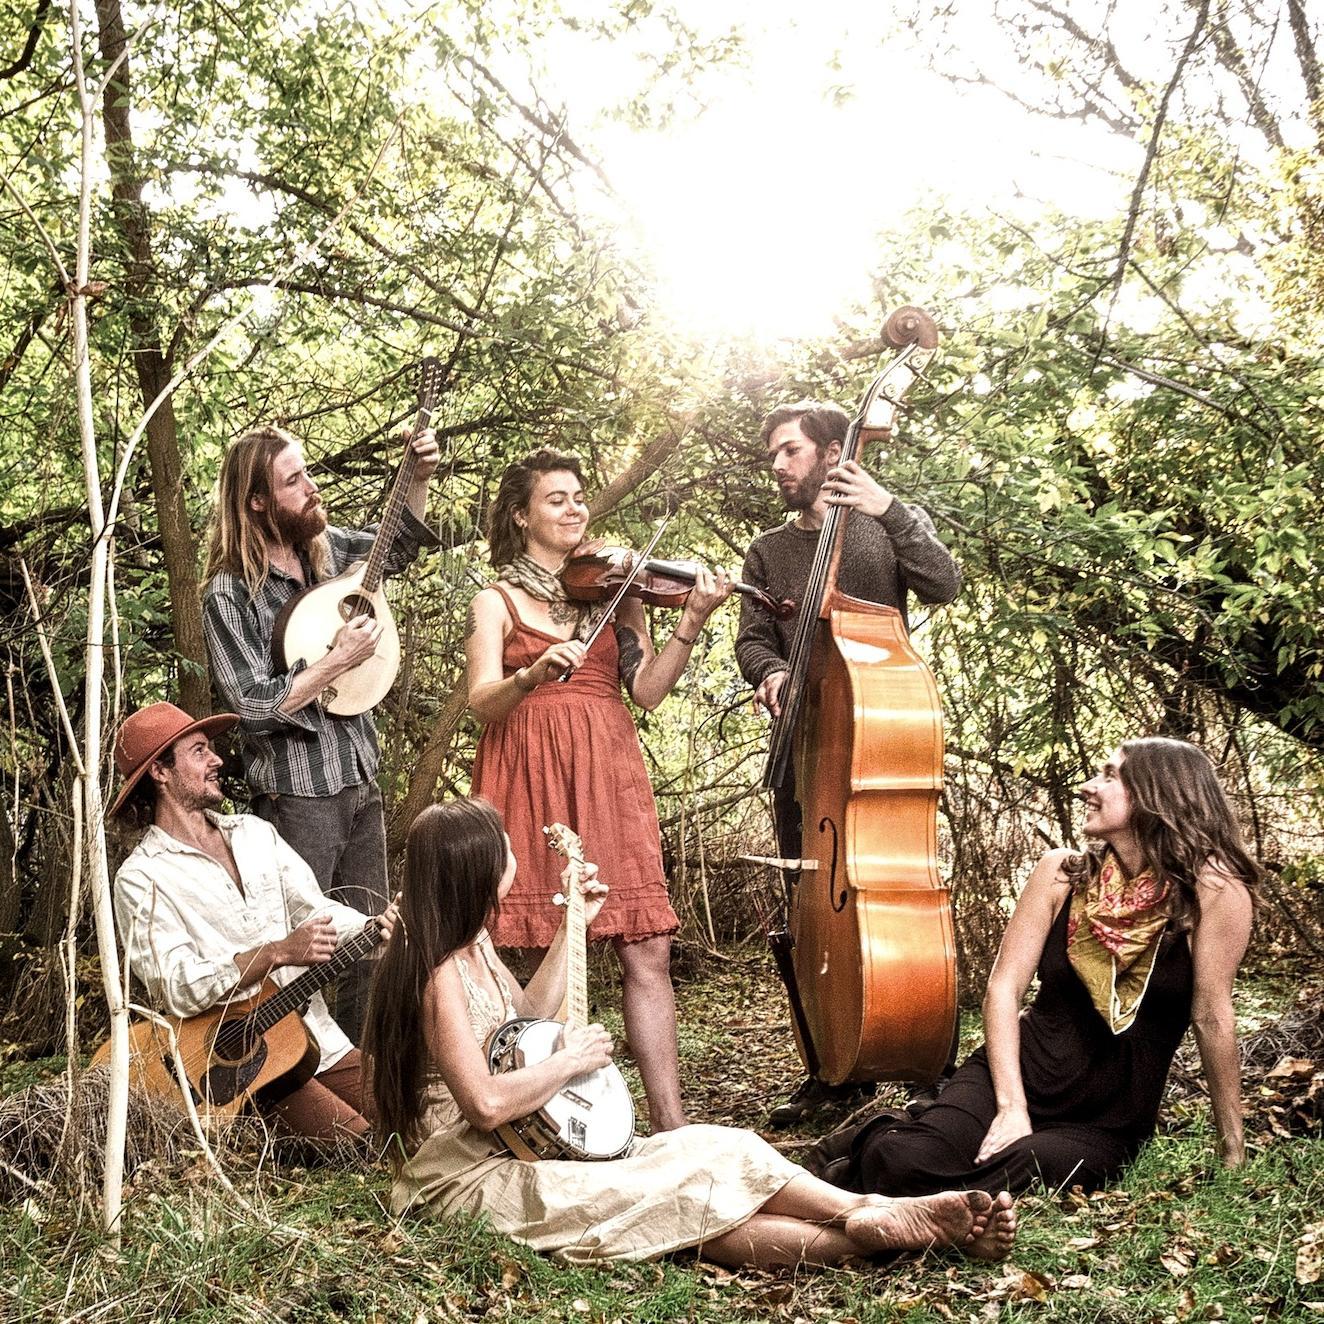 Exuberant Rustic Indie Folk Music from Ashland Oregon.  With a diverse array of acoustic instruments these minstrels sing joyful and jubilant!